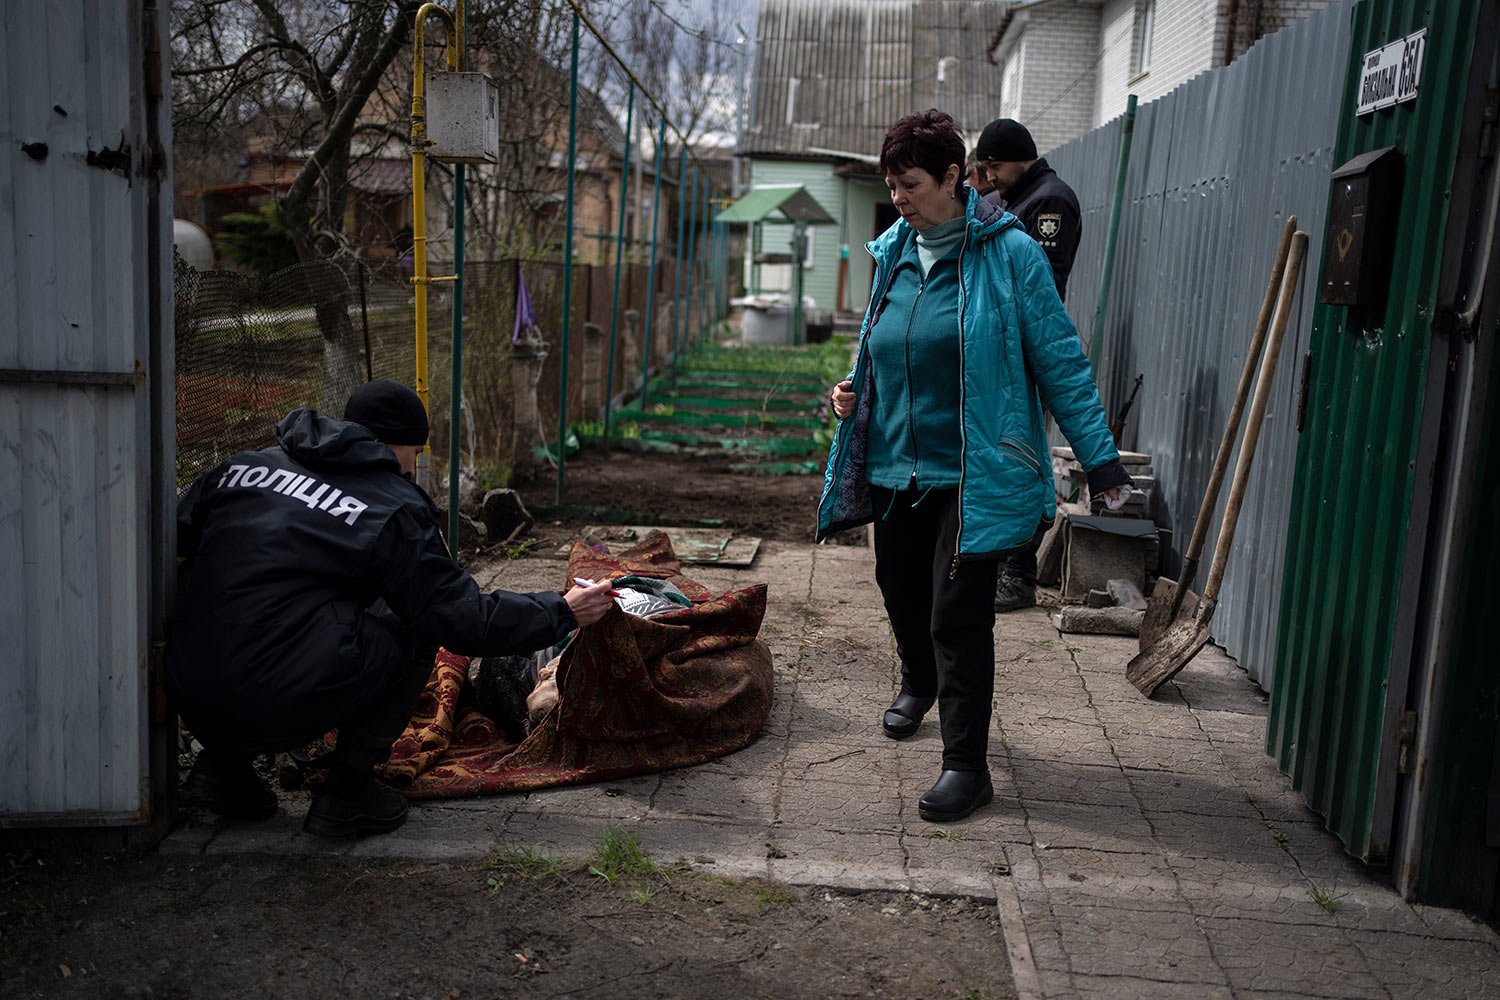  A policeman examines the corpse of a man killed during the war with Russia in Bucha, in the outskirts of Kyiv, Ukraine, Monday, April 11, 2022. (AP Photo/Rodrigo Abd) 